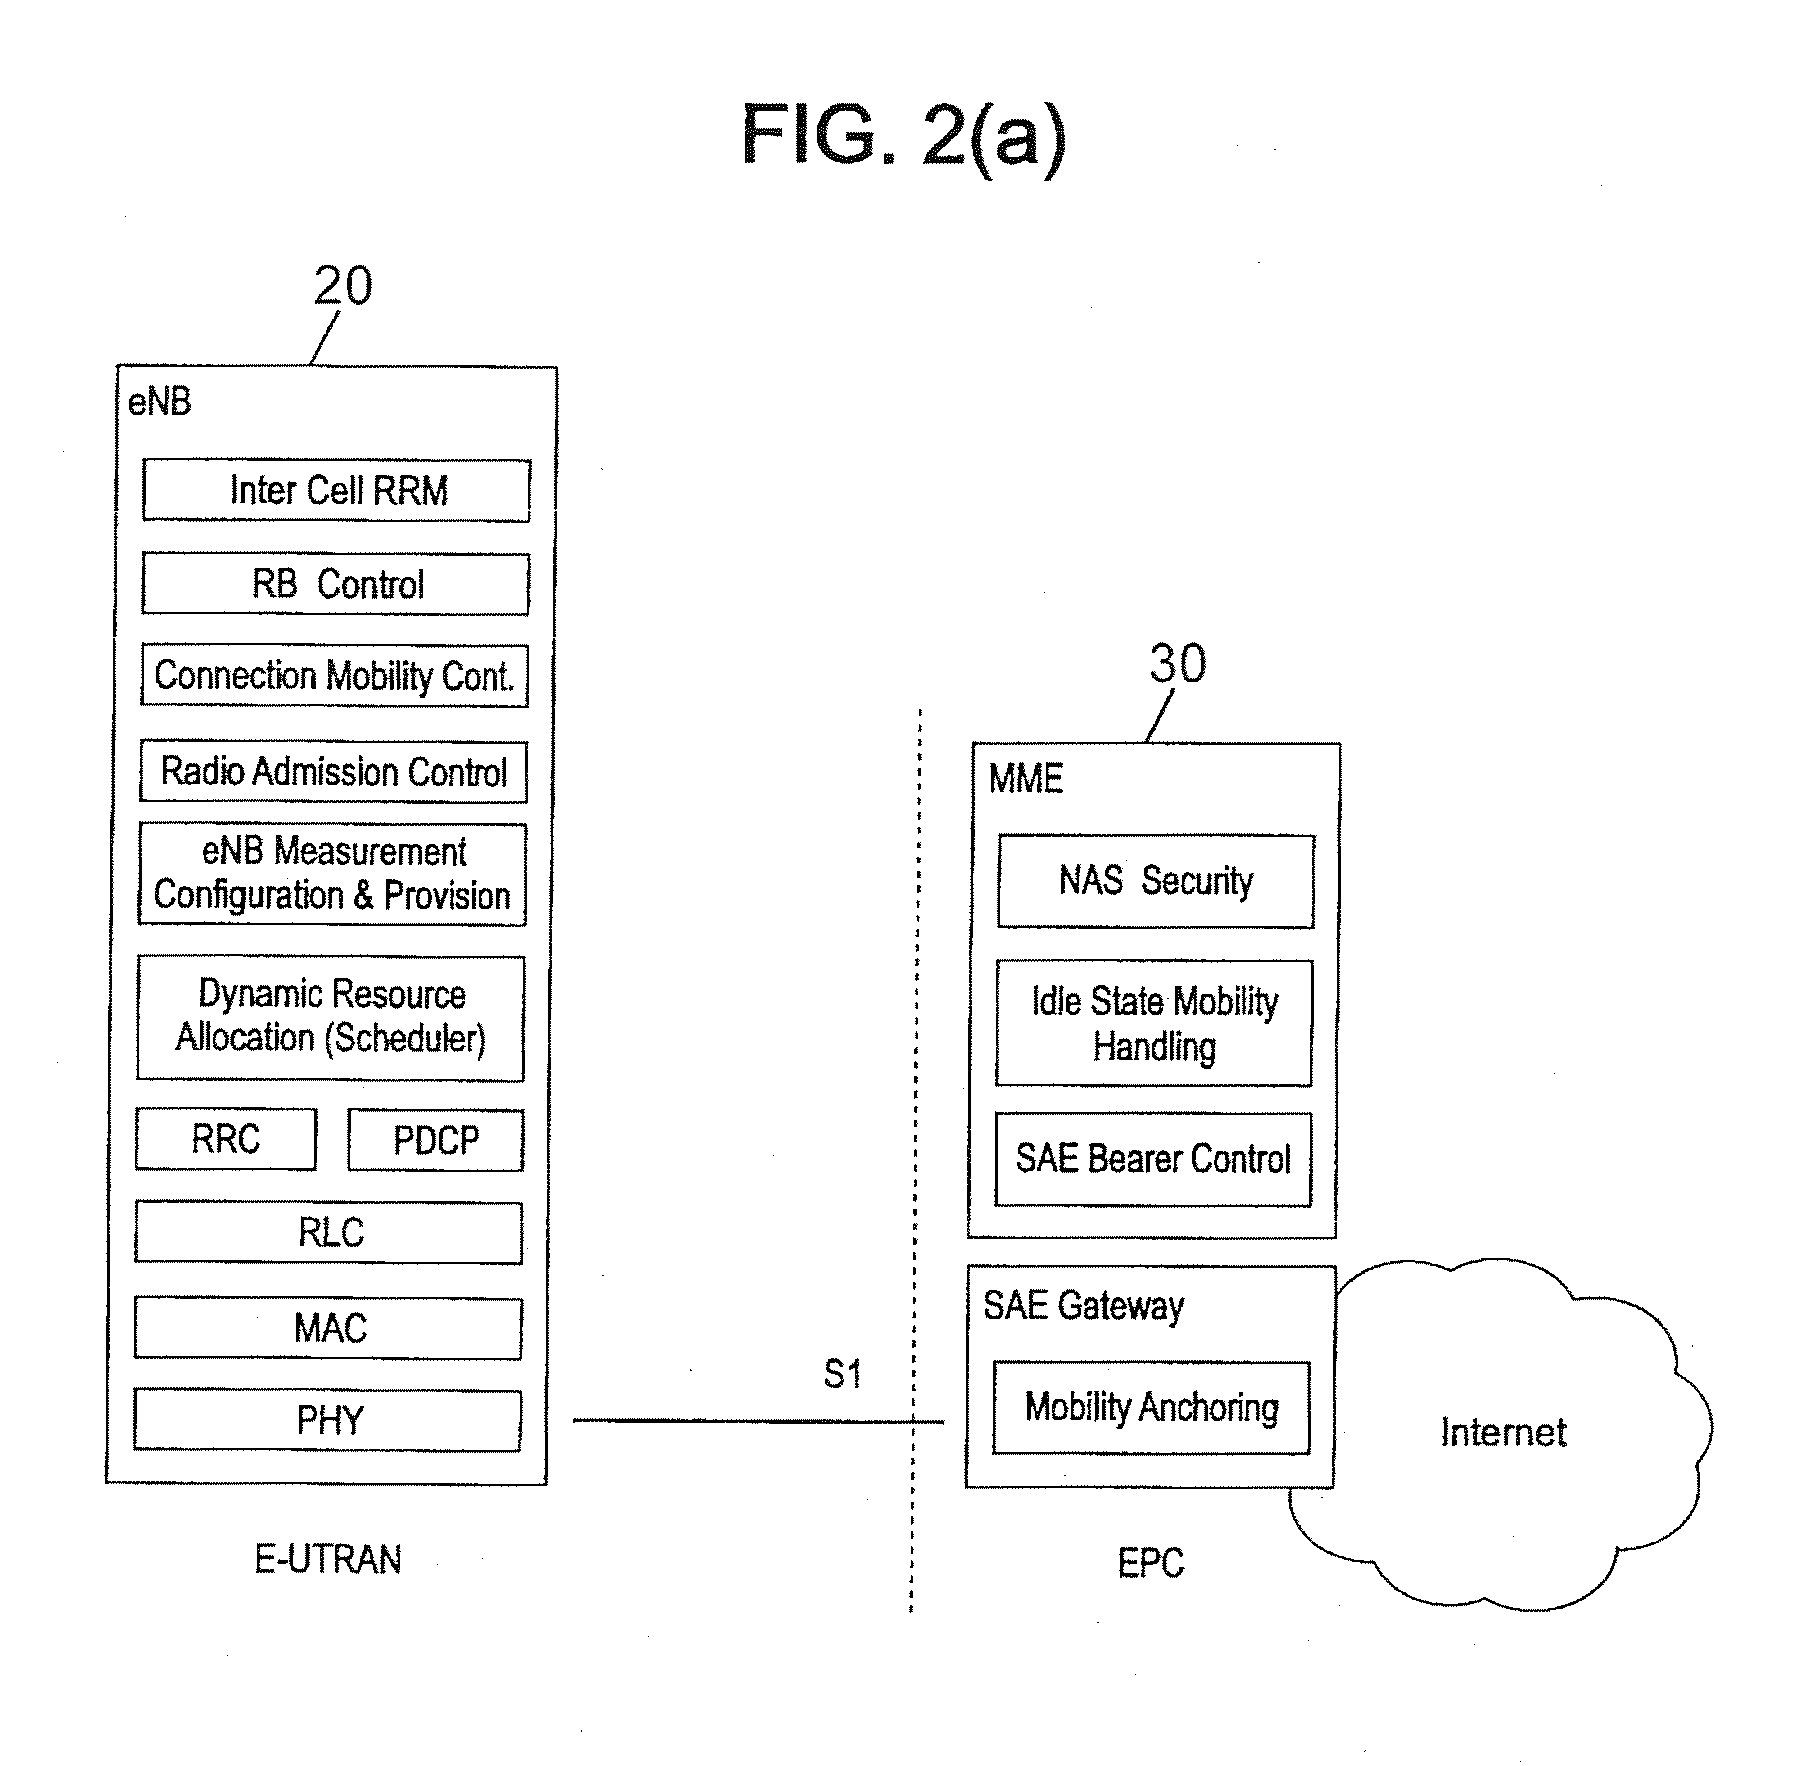 Wireless communication method for transmitting a sequence of data units between a wireless device and a network